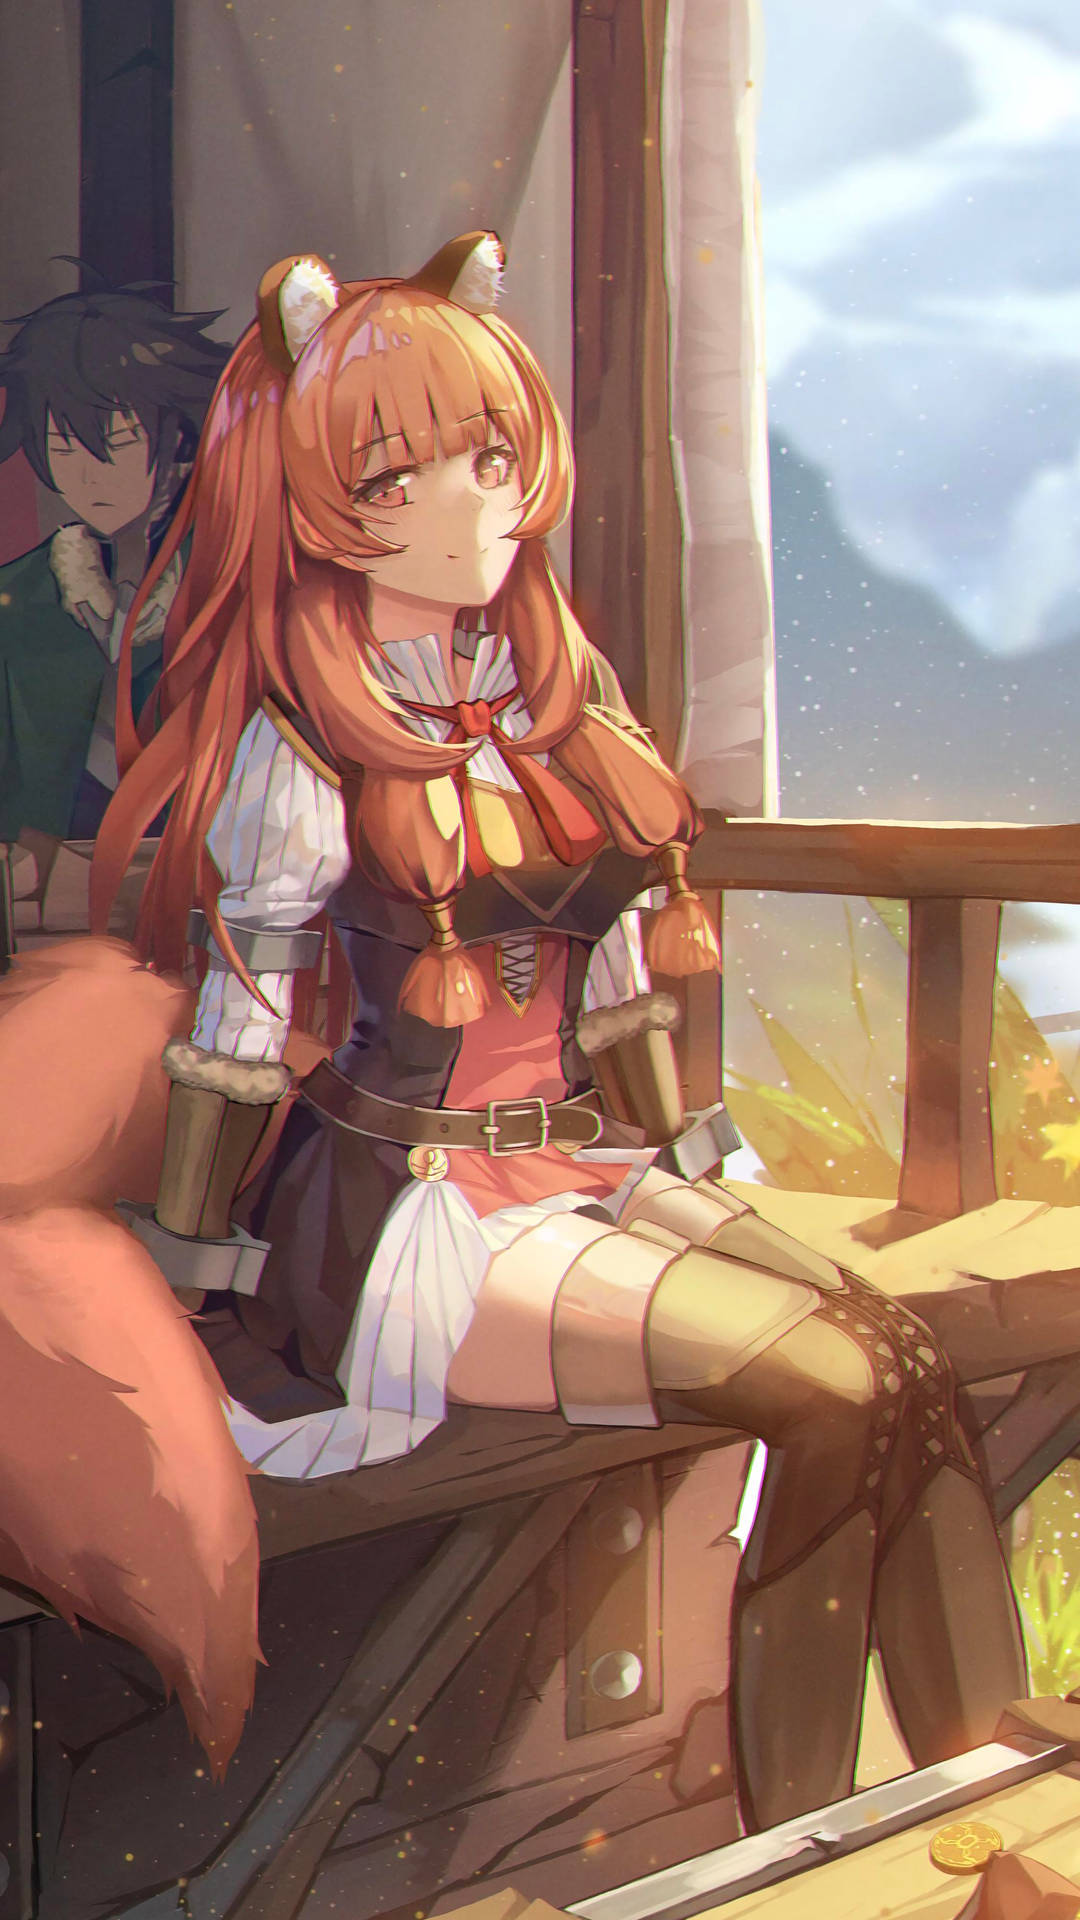 A Girl Sitting On A Bench With A Fox